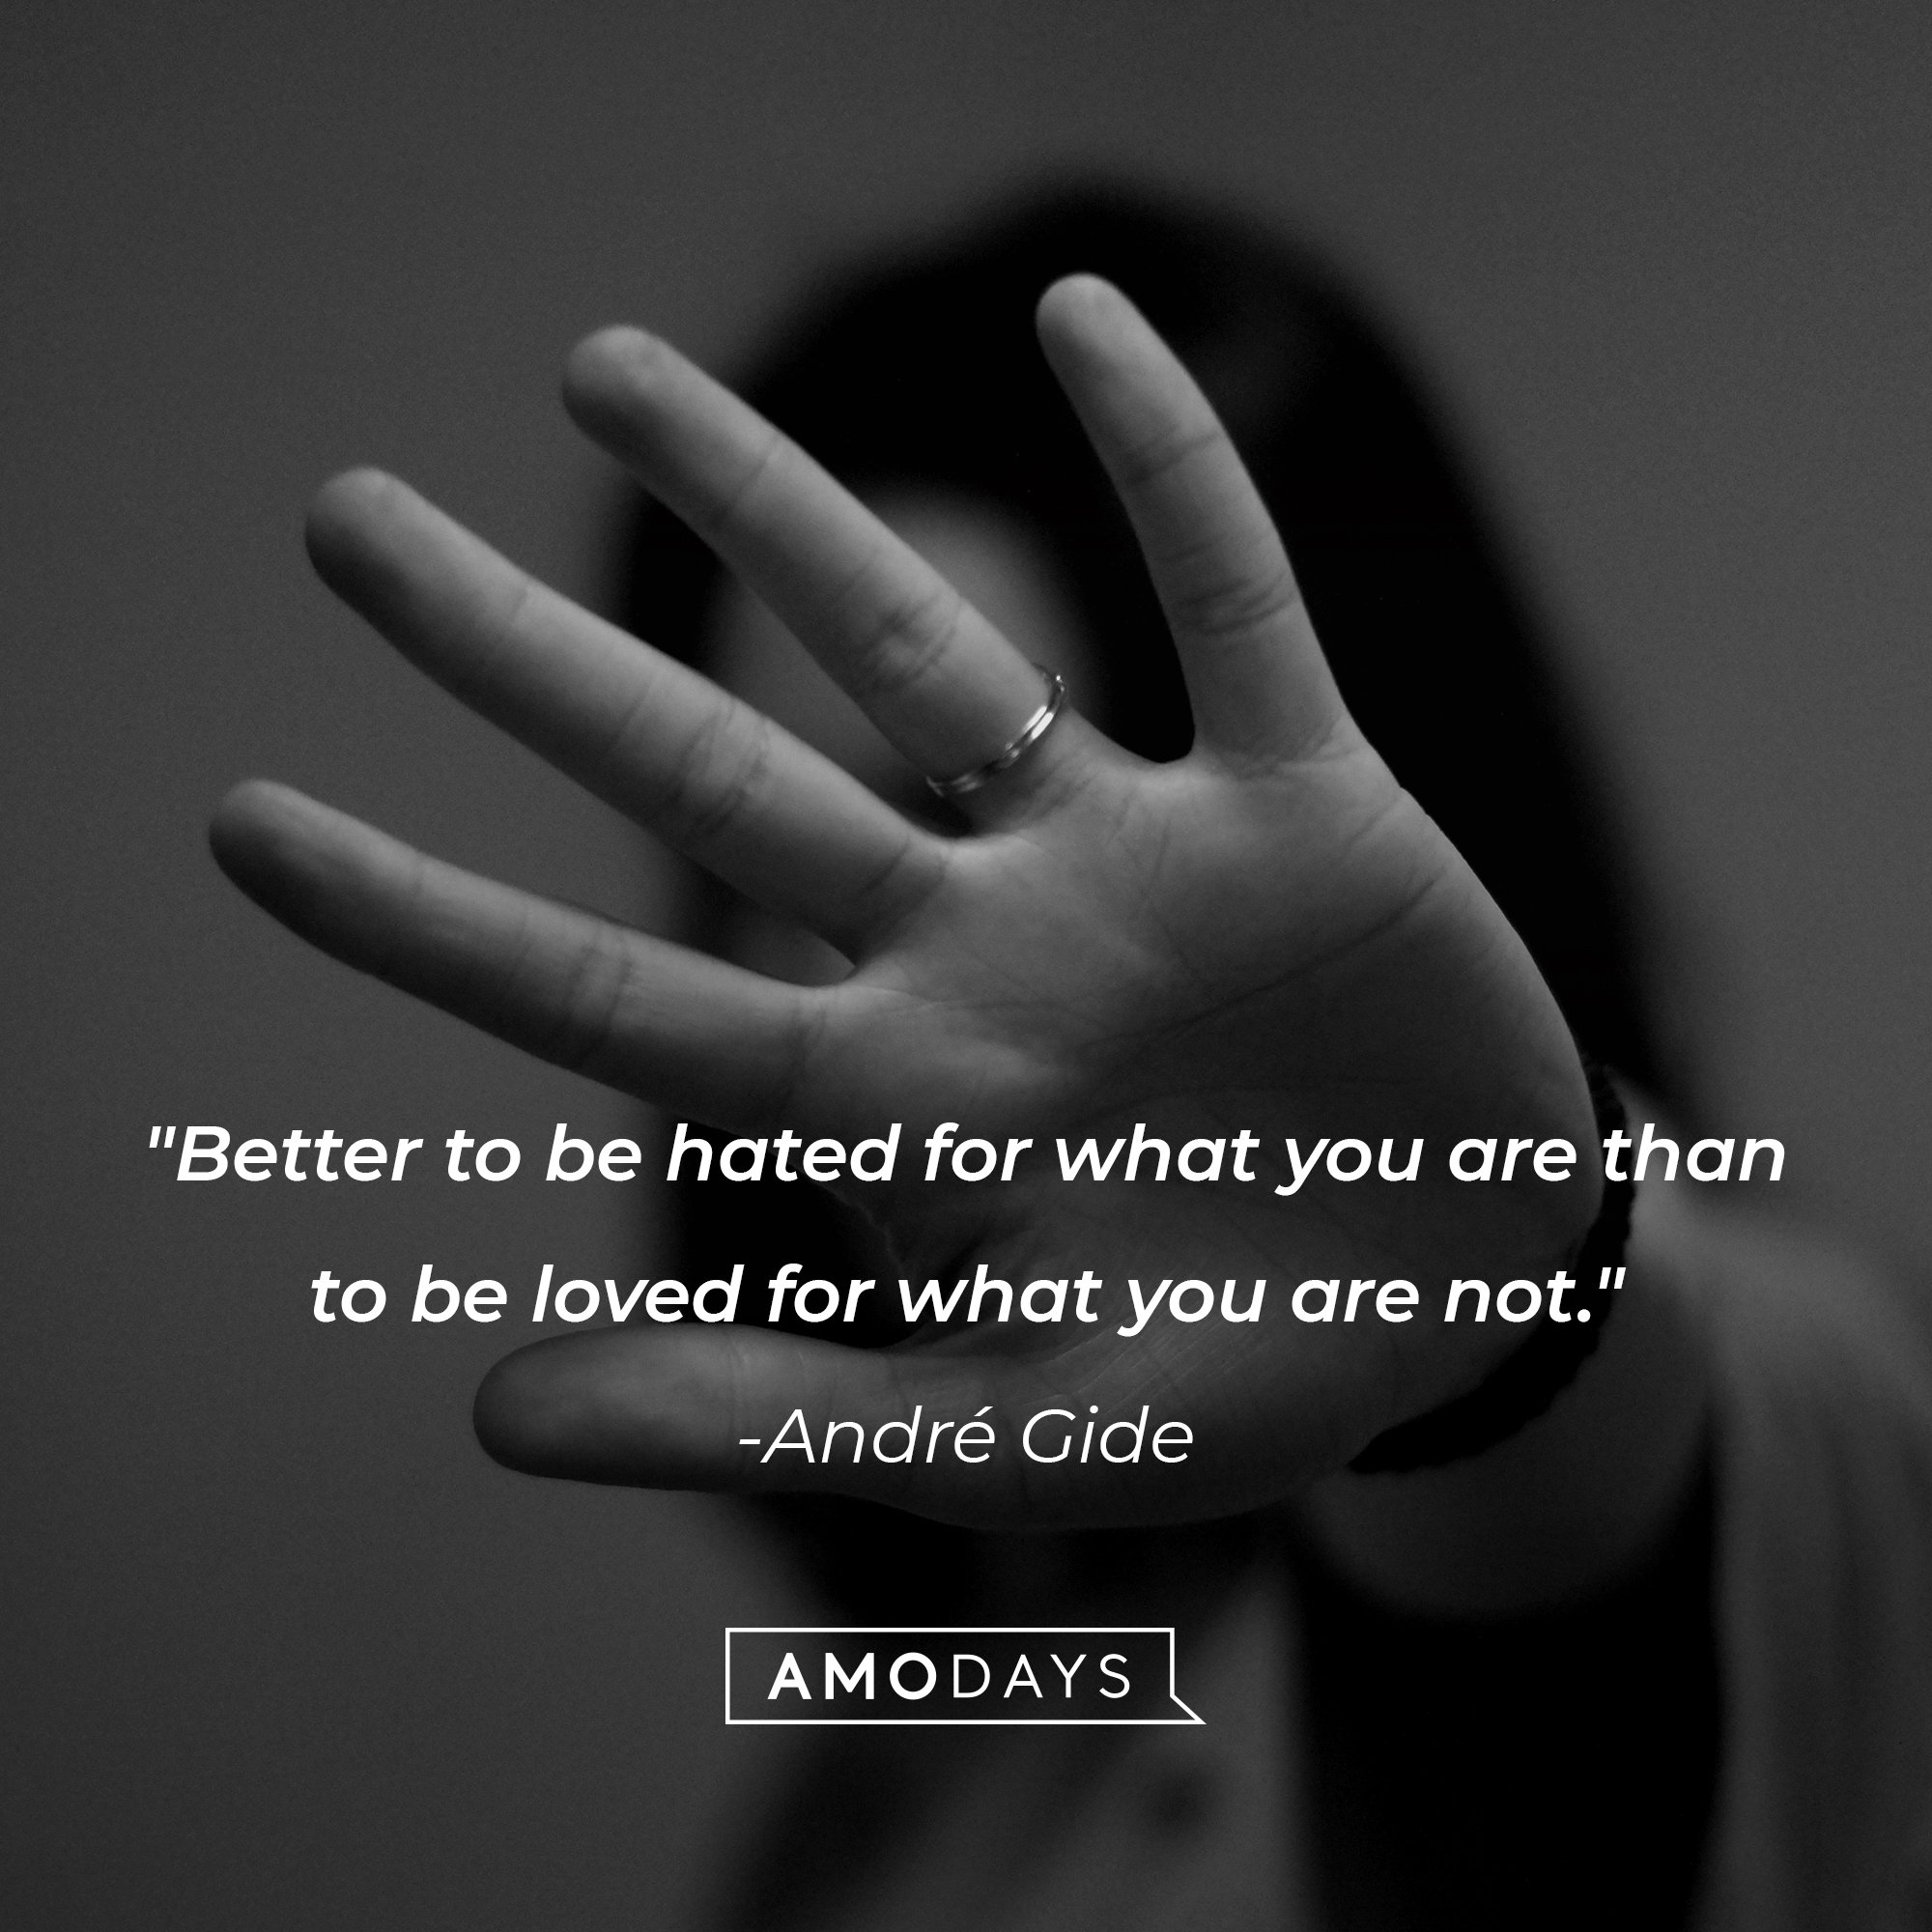 André Gide’s quote: "Better to be hated for what you are than to be loved for what you are not."  | Image: Amodays